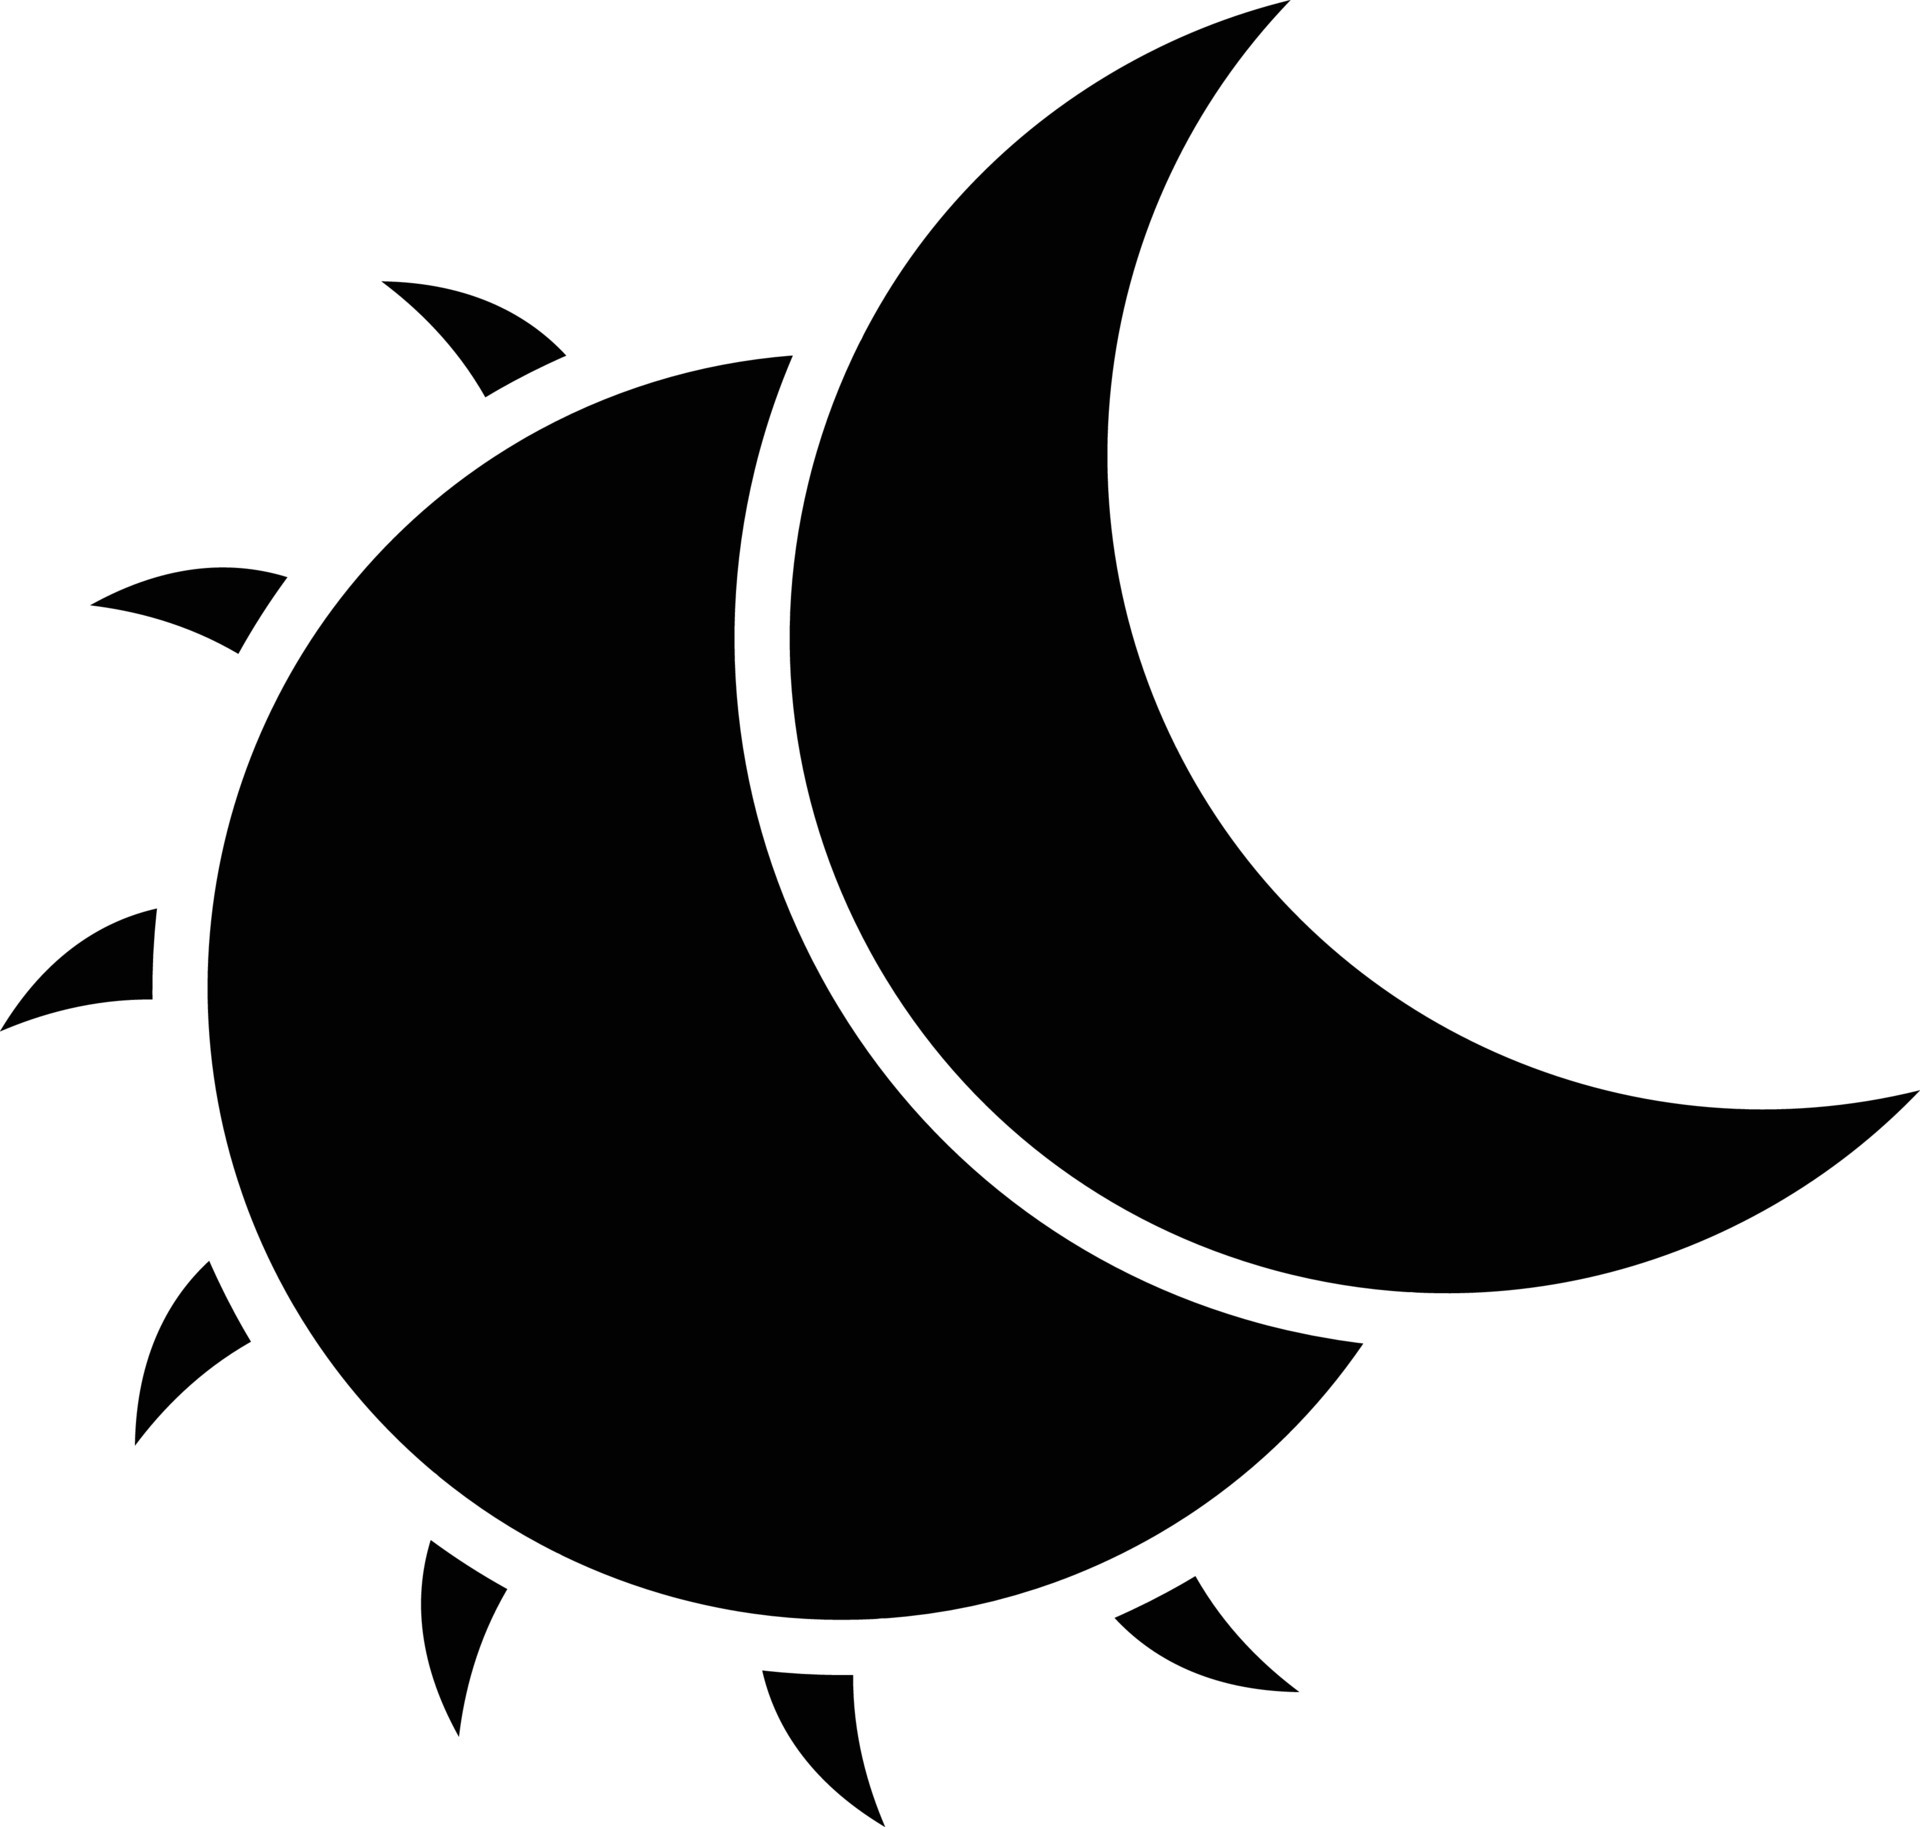 eclipse icon style vector